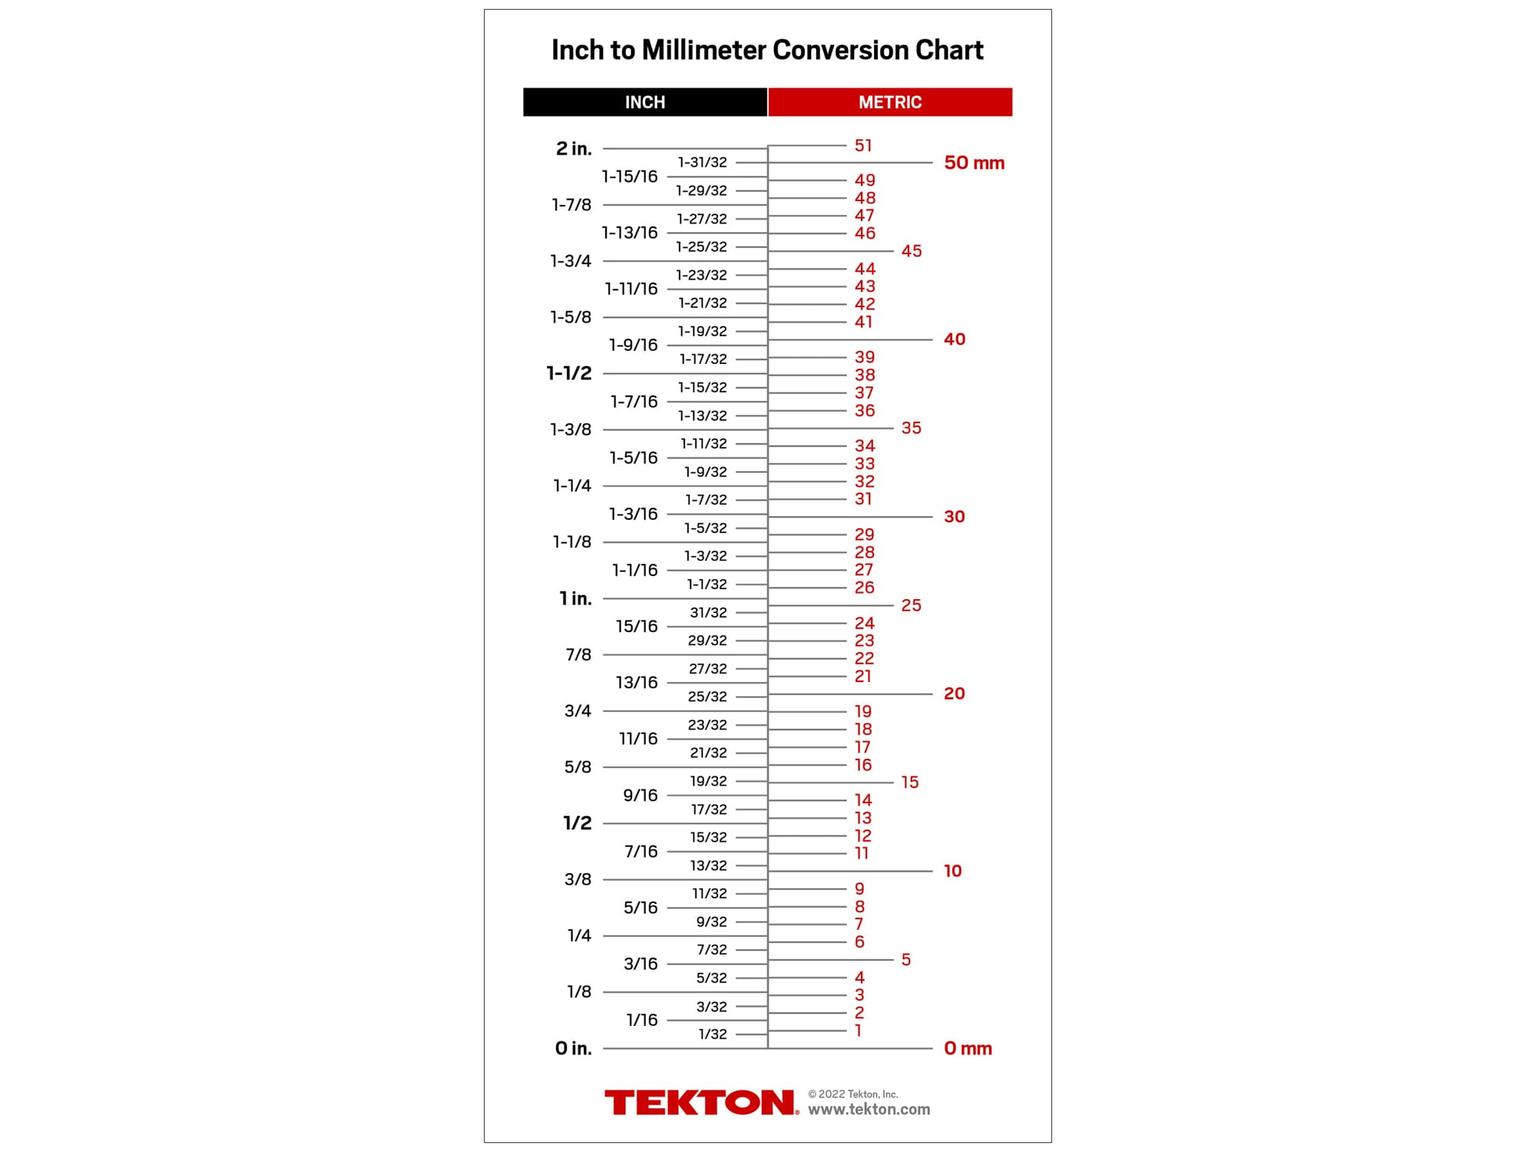 Conversion Chart Card (5 x 10 in.)